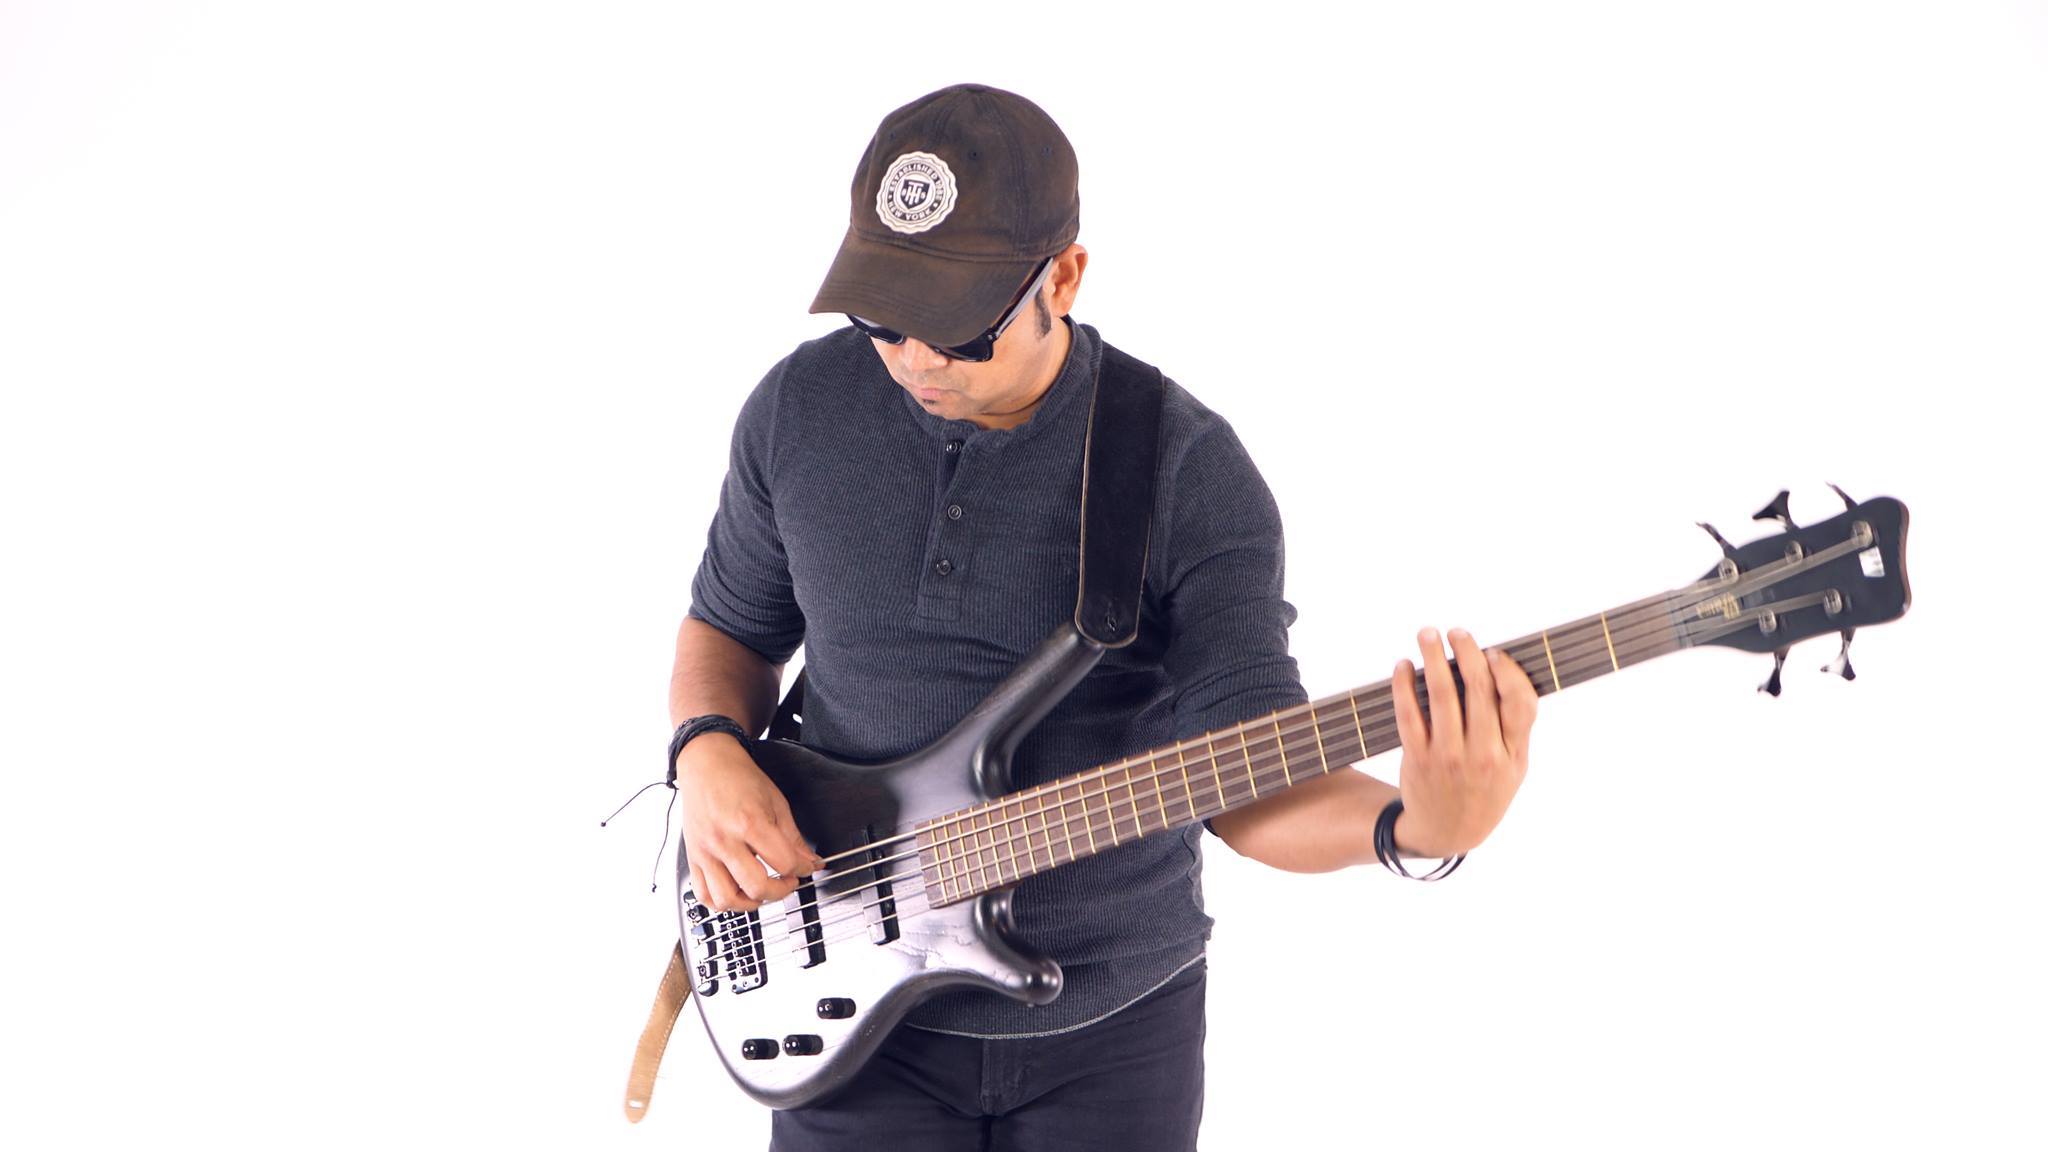 Tushar, a Bass player and vocalist with the group Melodic Intersect